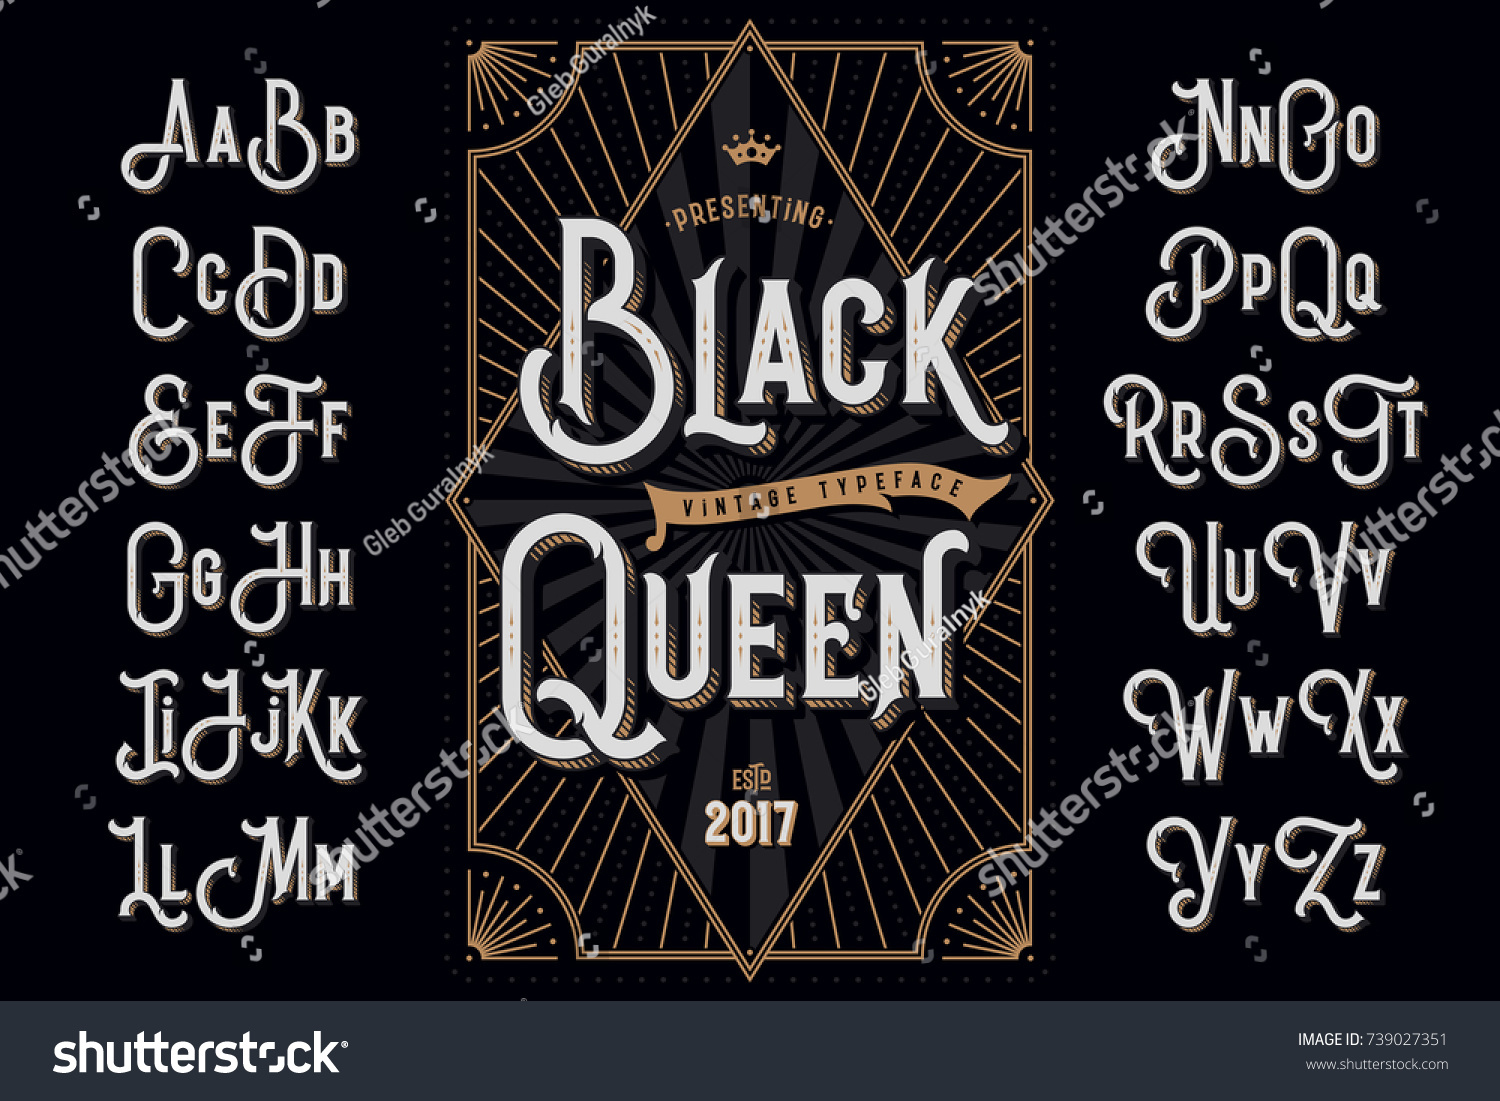 Decorative typeface named "Black Queen" with extruded lines effect and vintage label template #739027351